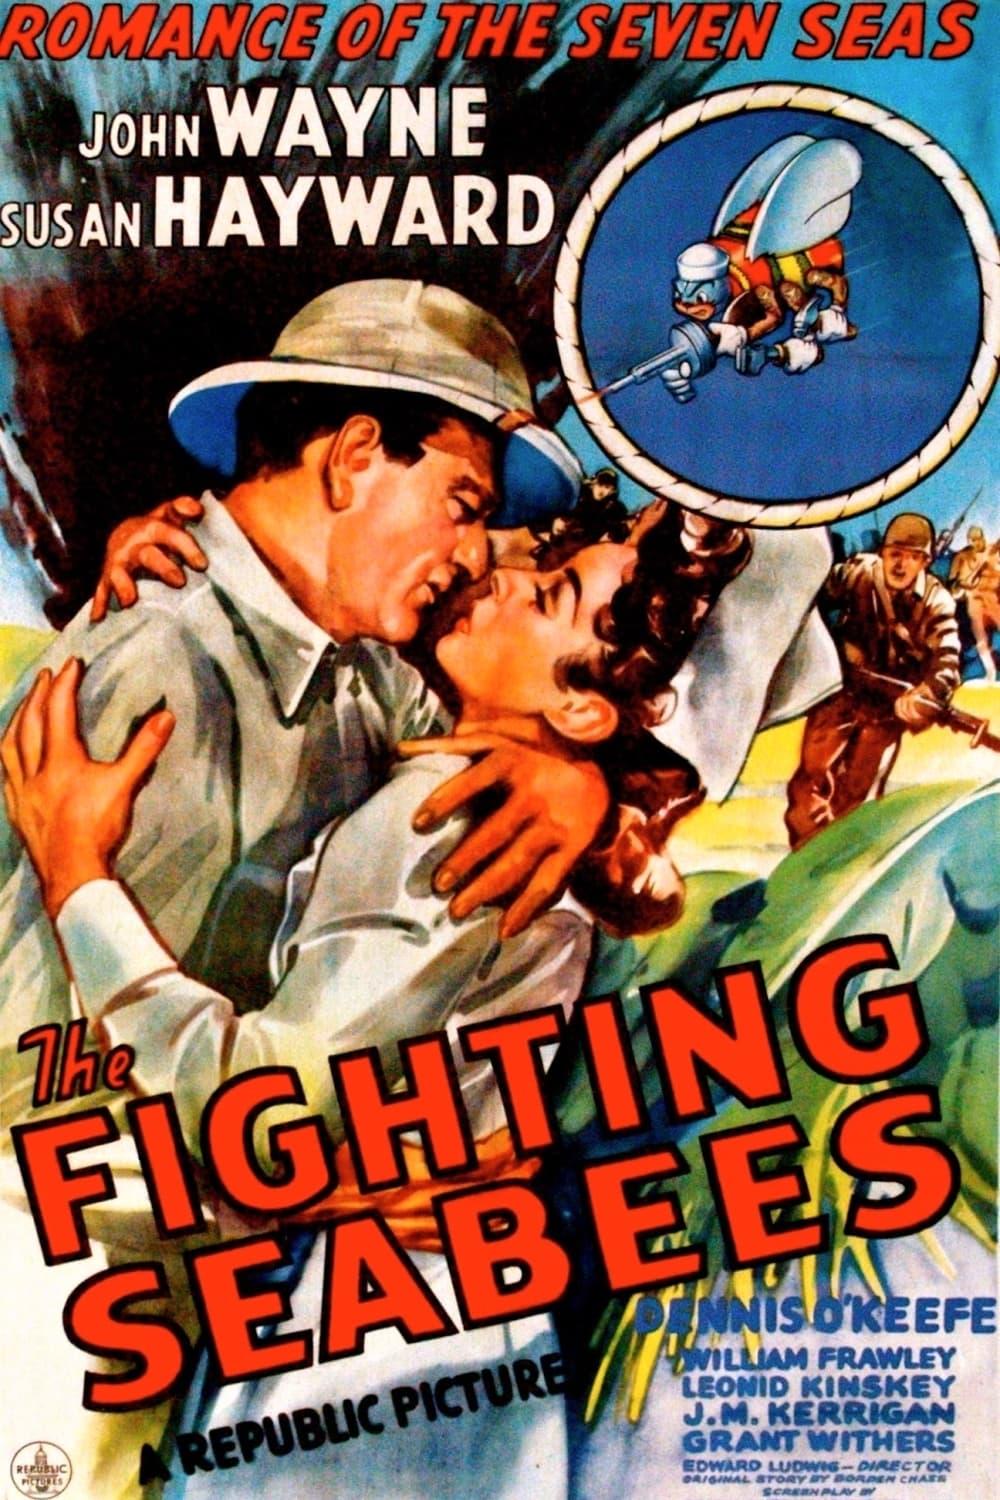 The Fighting Seabees poster